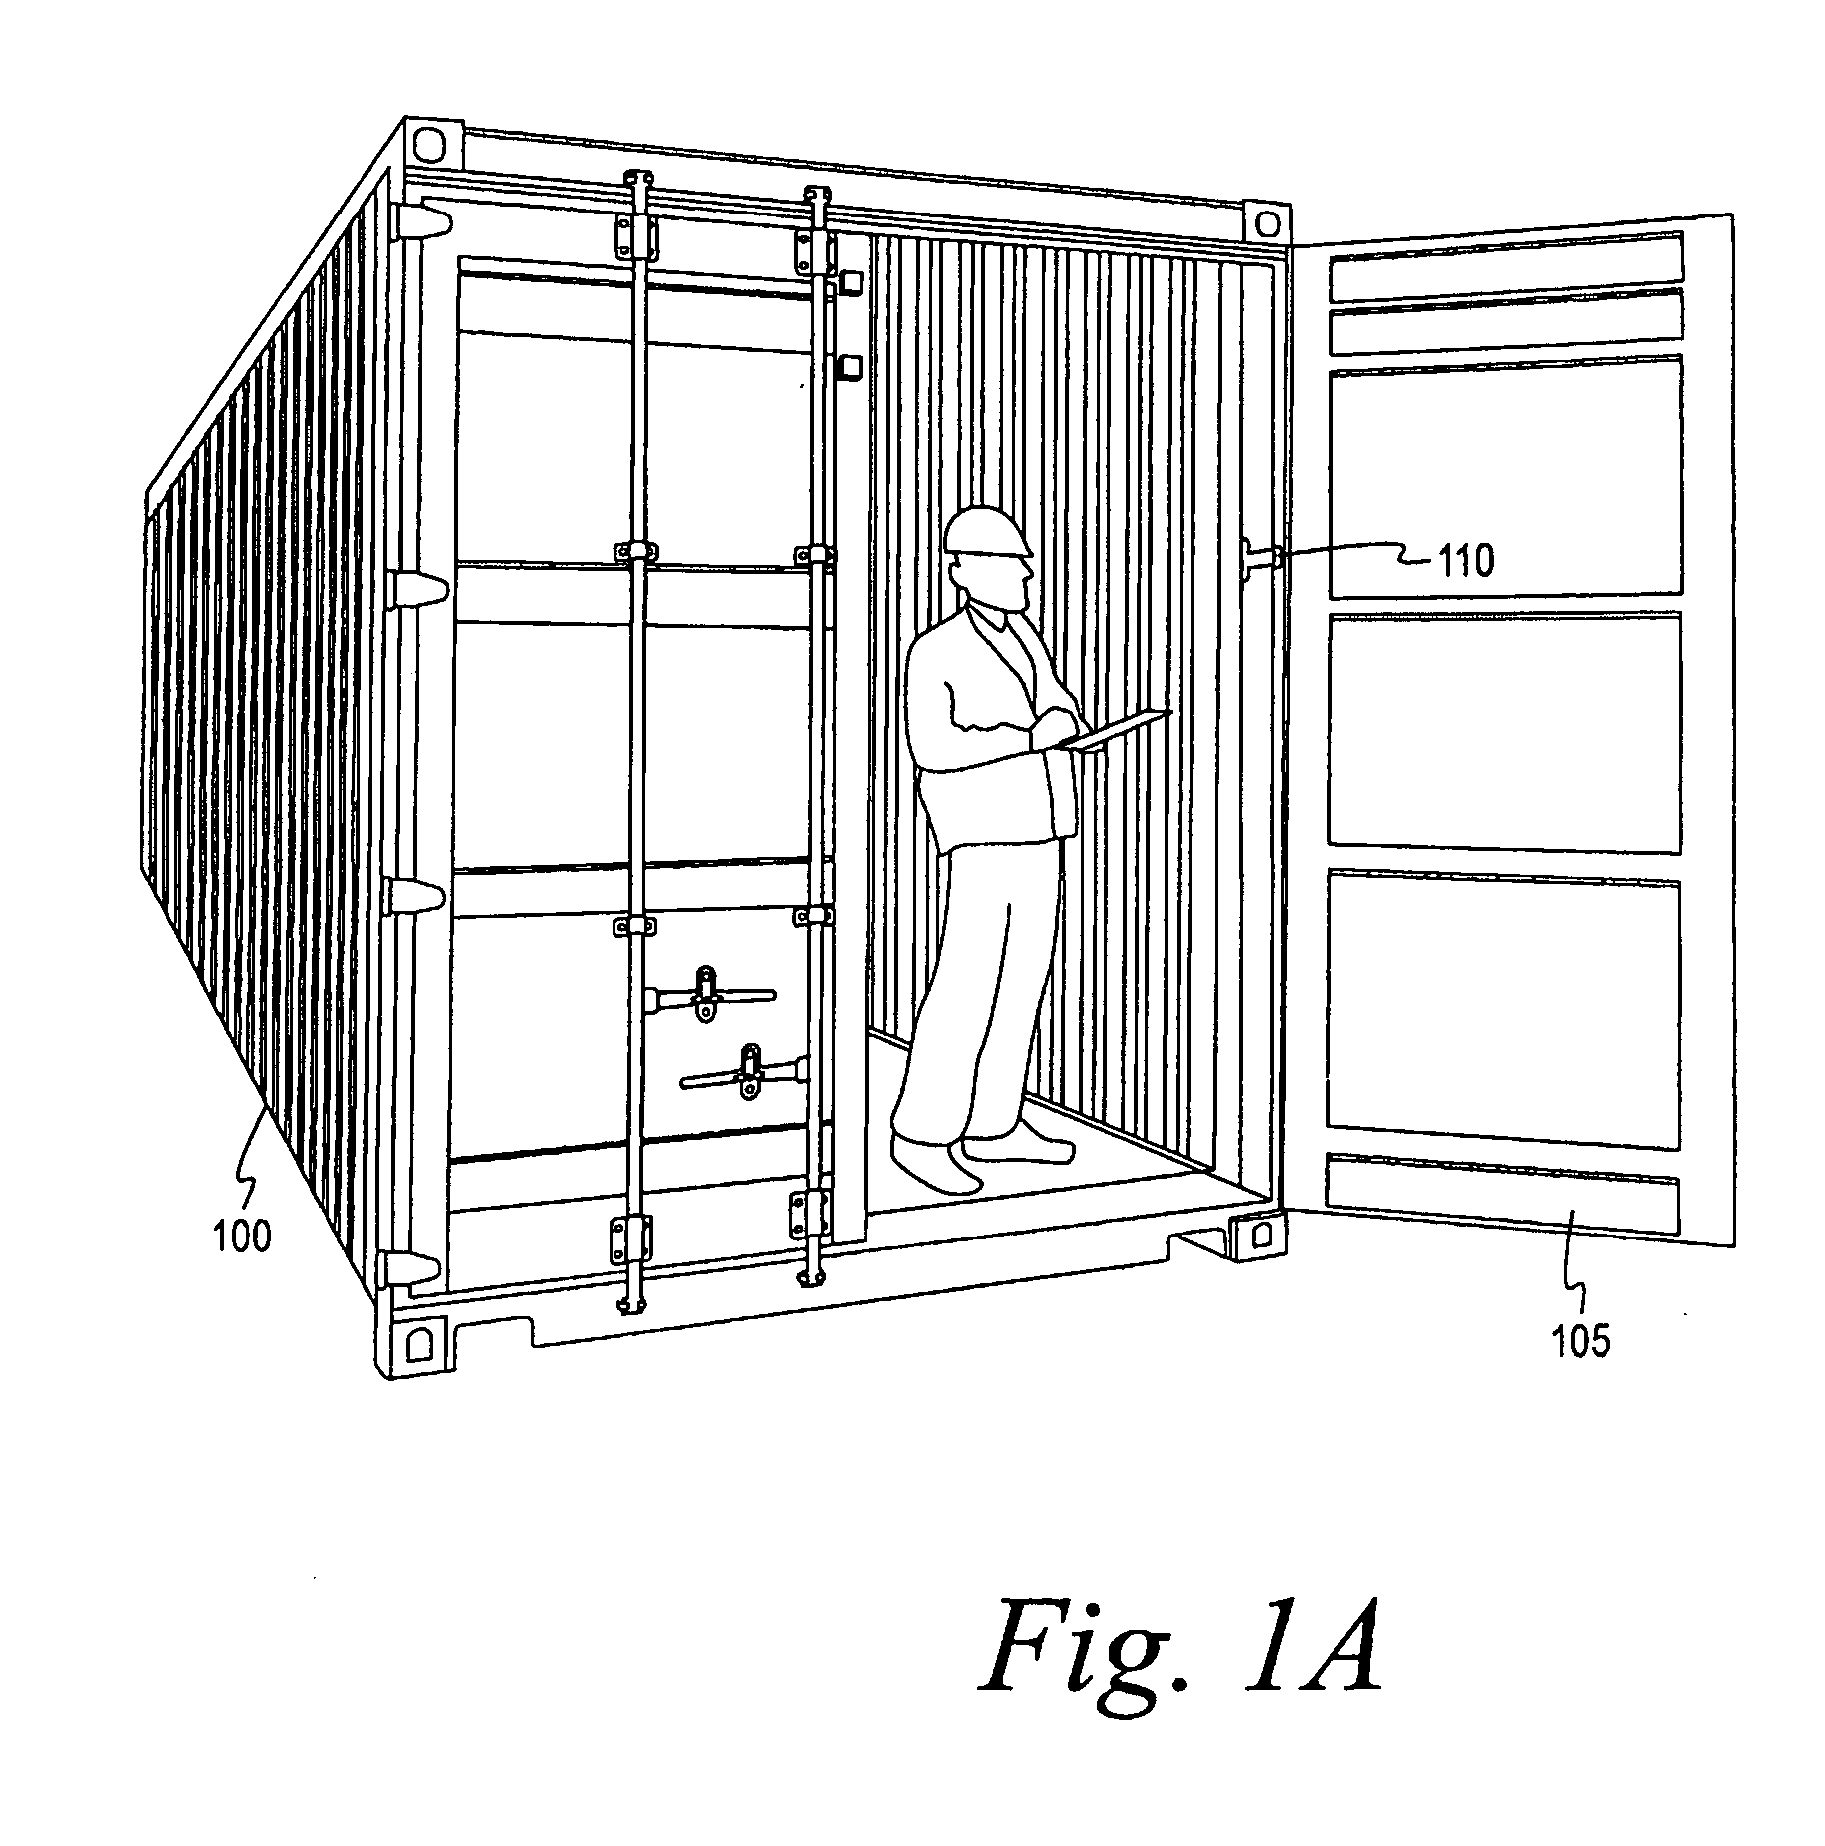 Method and system for arming a multi-layered security system